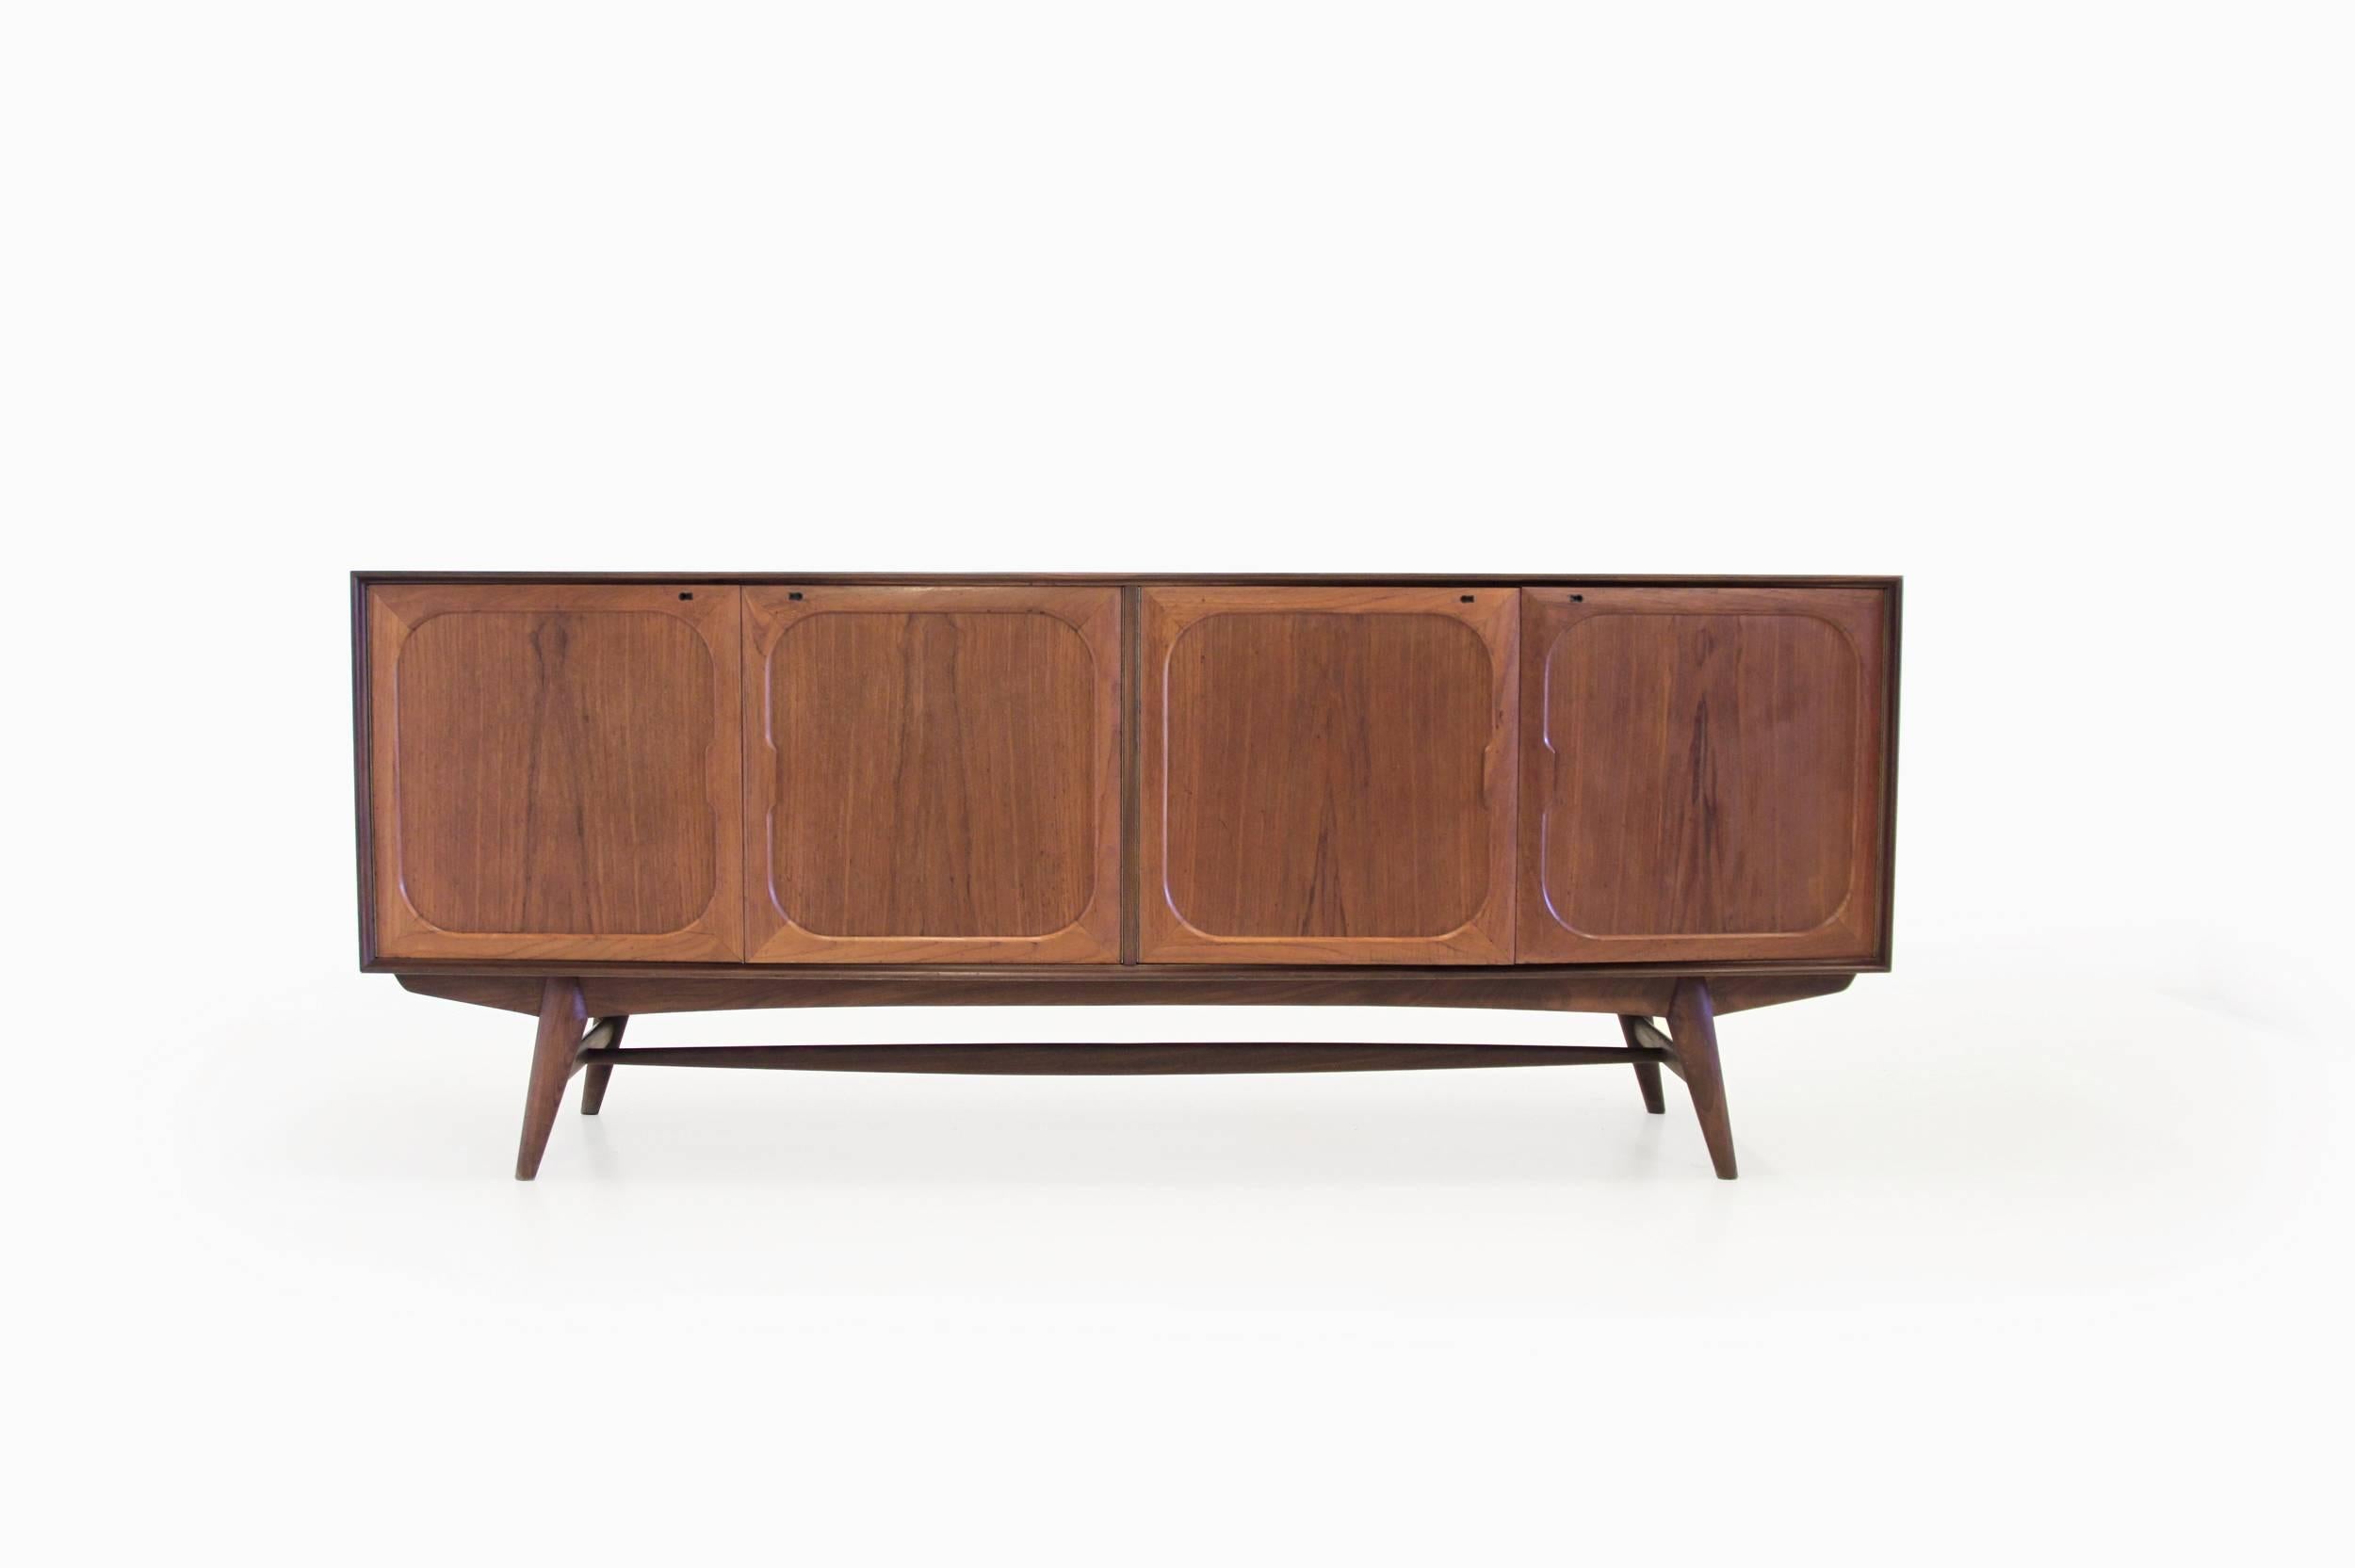 Large and Minimalist sideboard on a teak frame, four doors and four drawers. Designed by Adolf Relling and Rolf Rastad and manufactured in Norway by Gustav Bahus eftf. The sideboard is in excellent condition with normal age related wear and minor